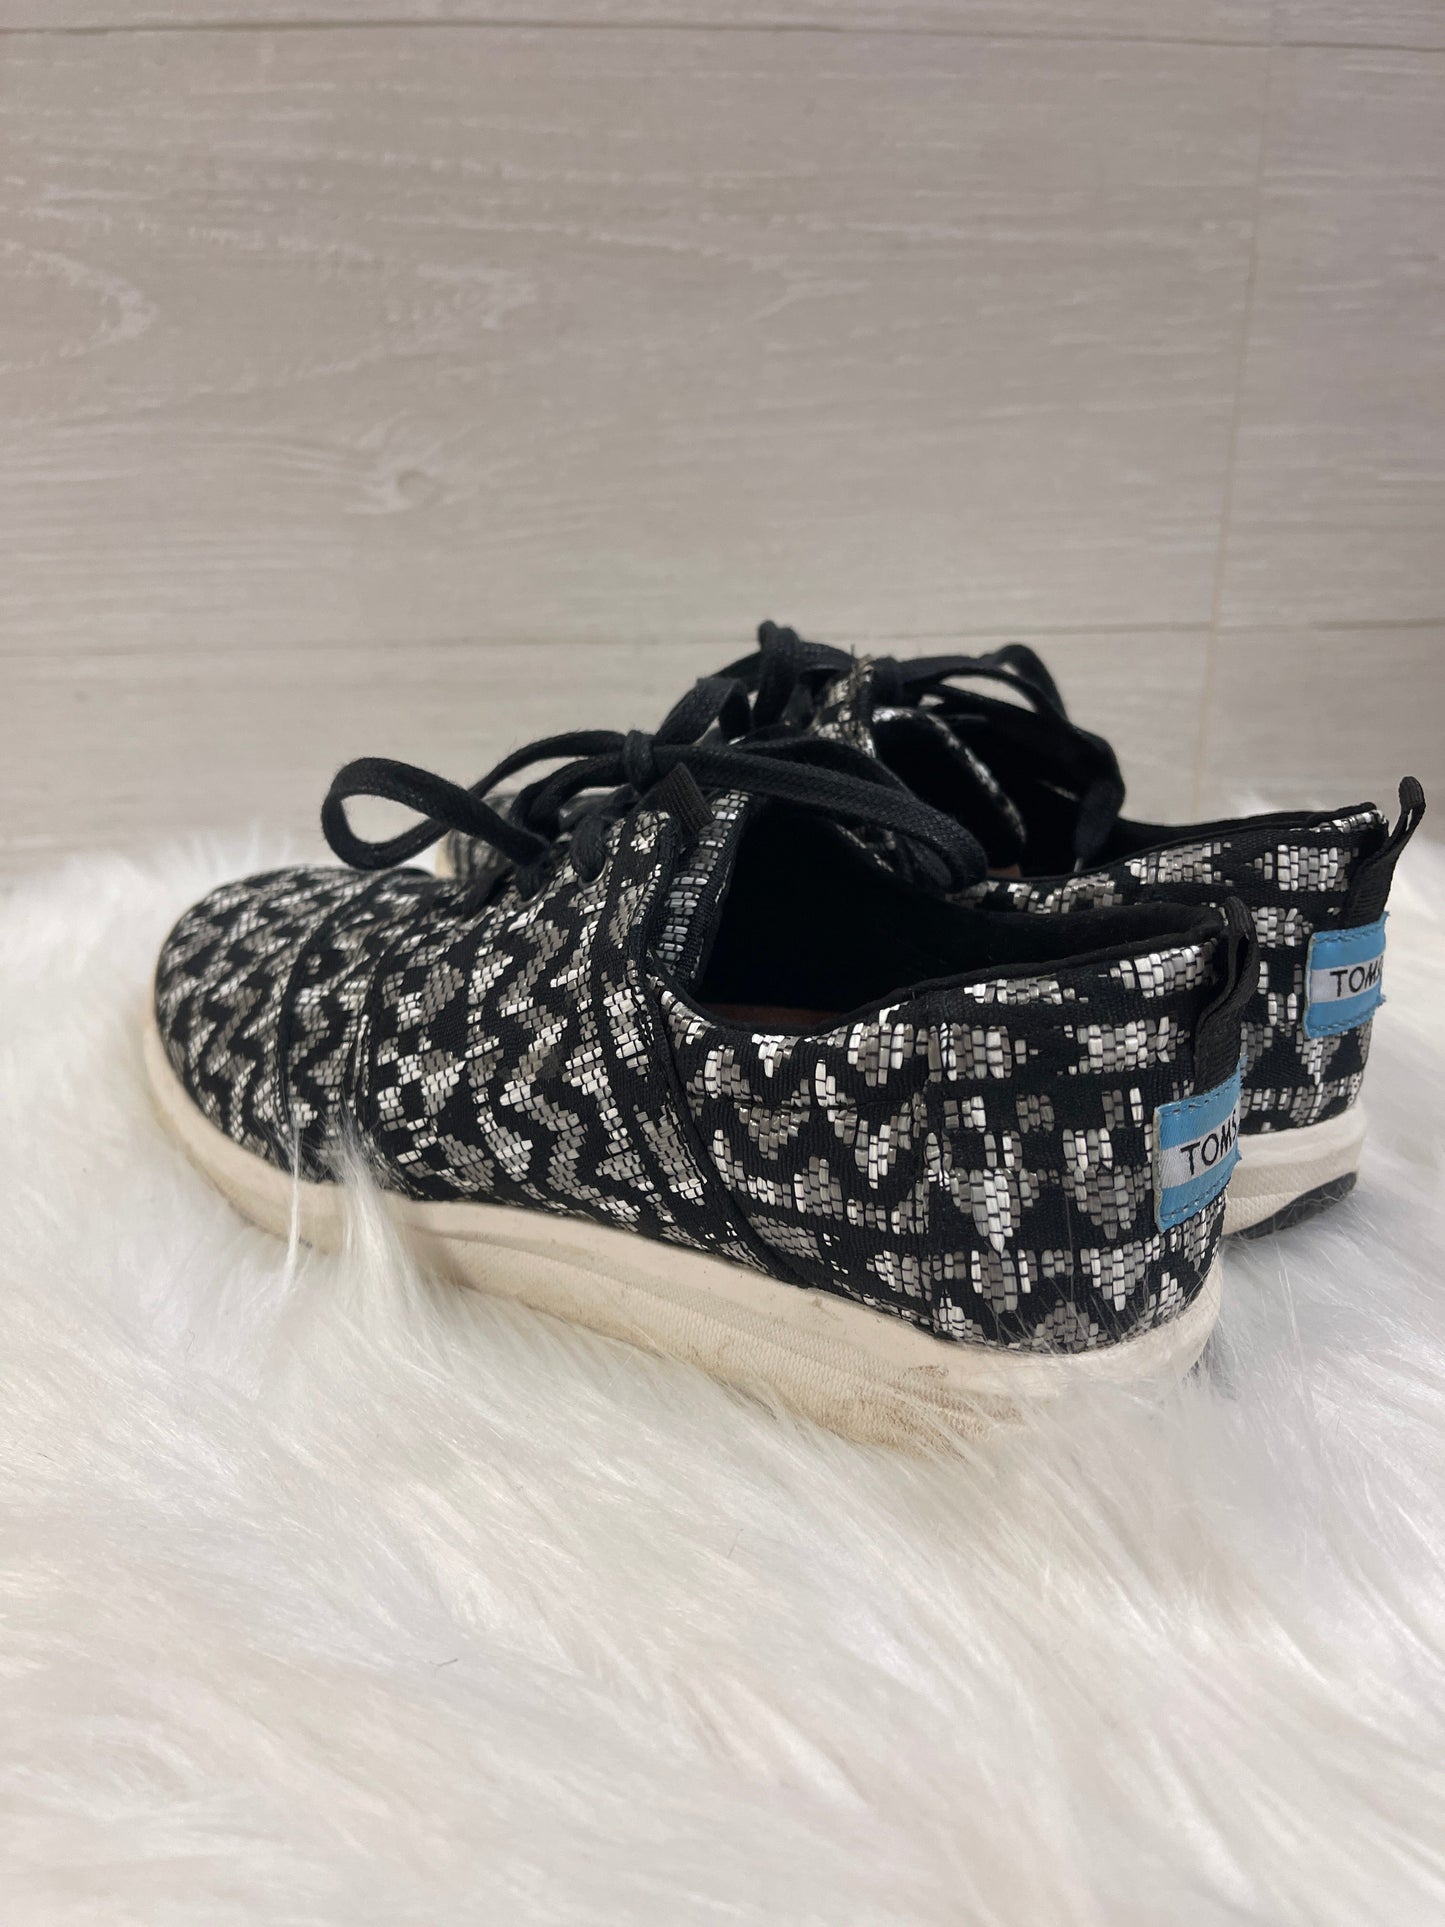 Shoes Sneakers By Toms  Size: 8.5